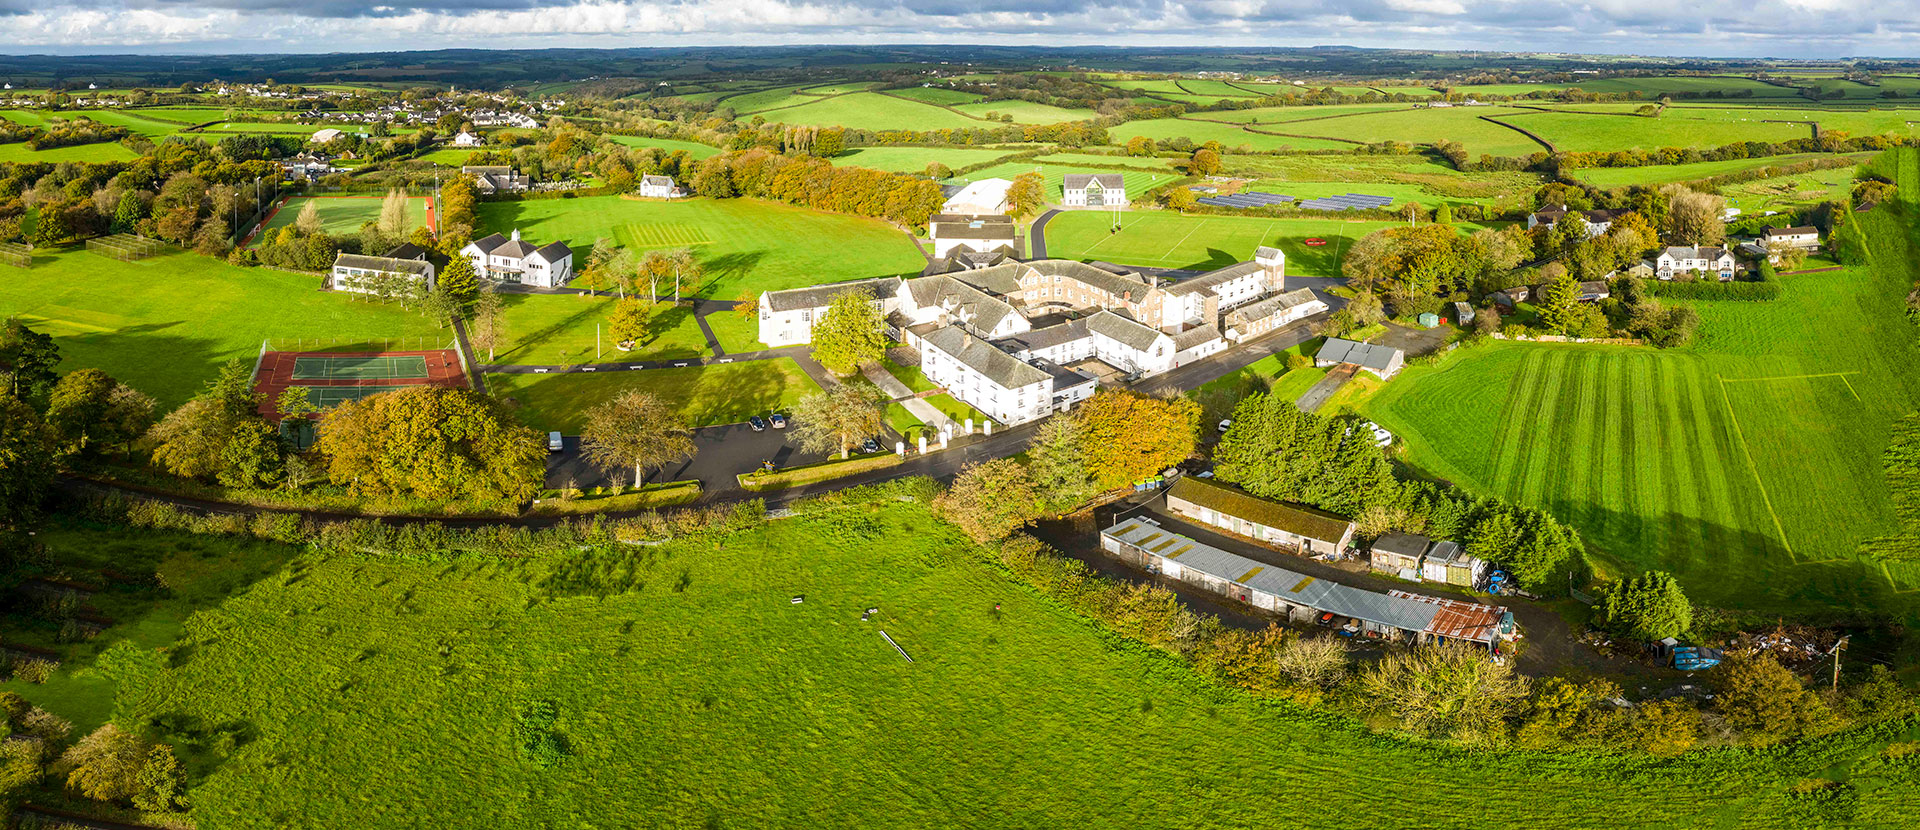 Shebbear College from the air